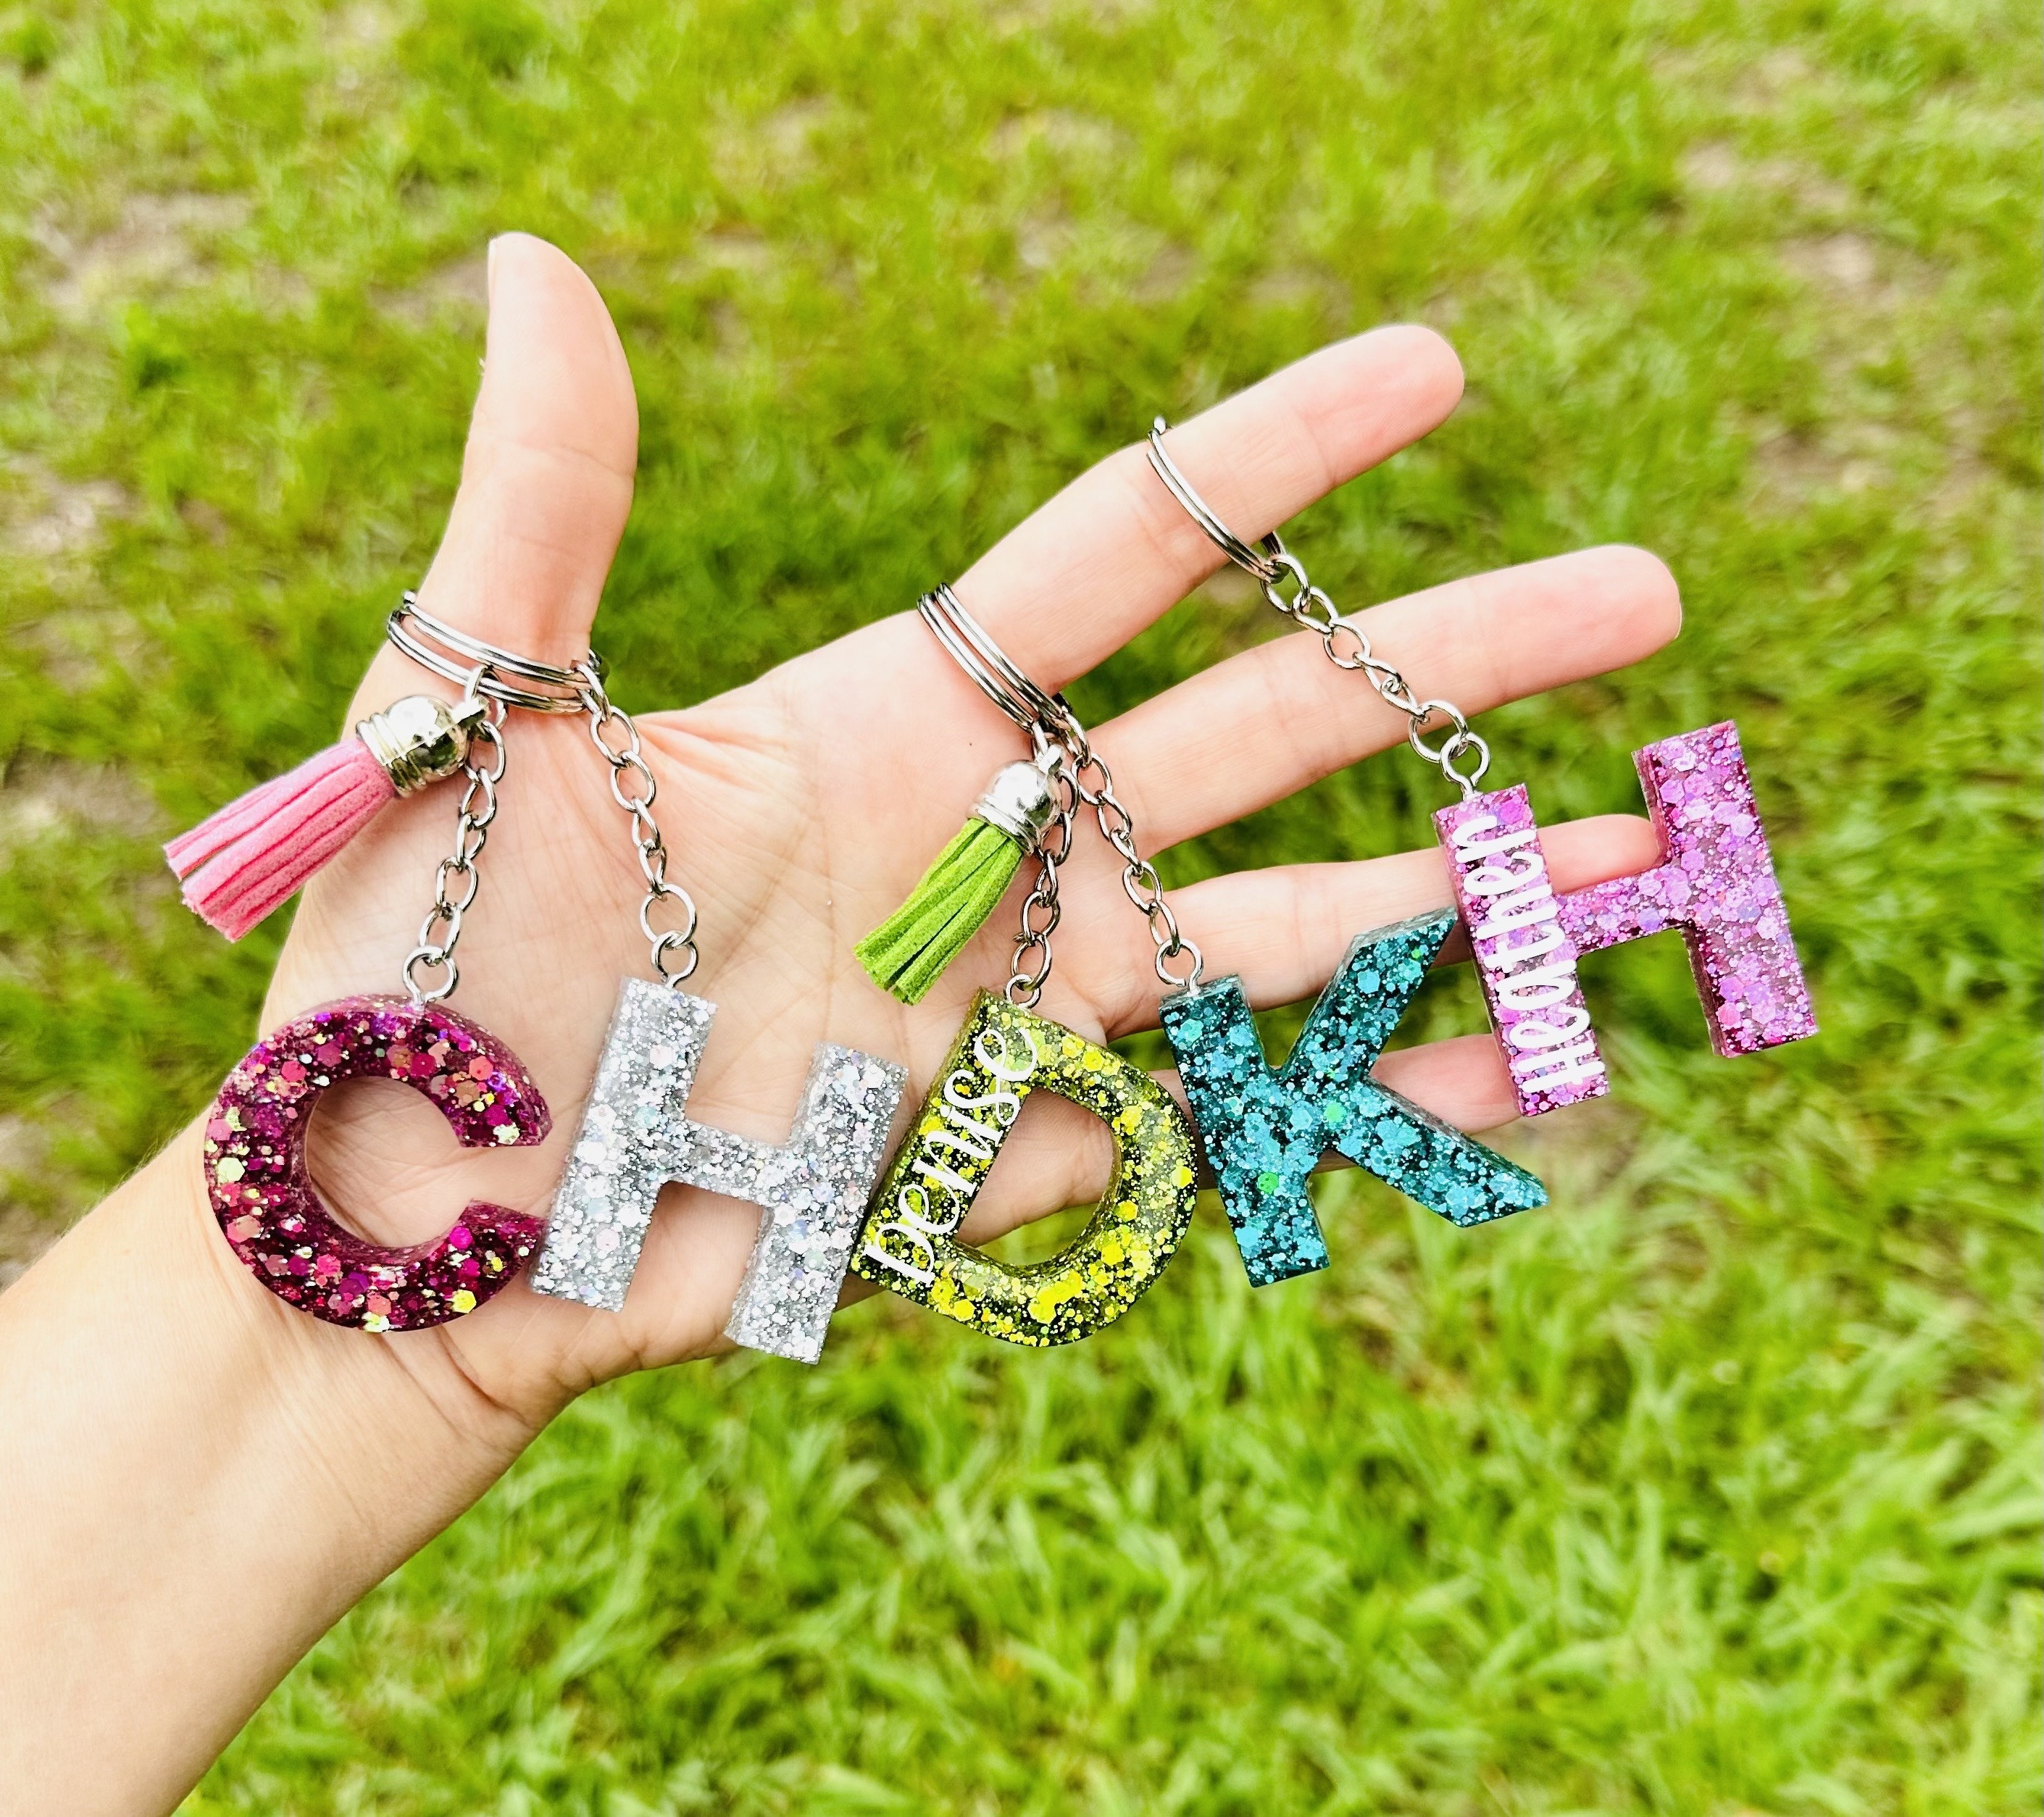 Letter I silicone key ring